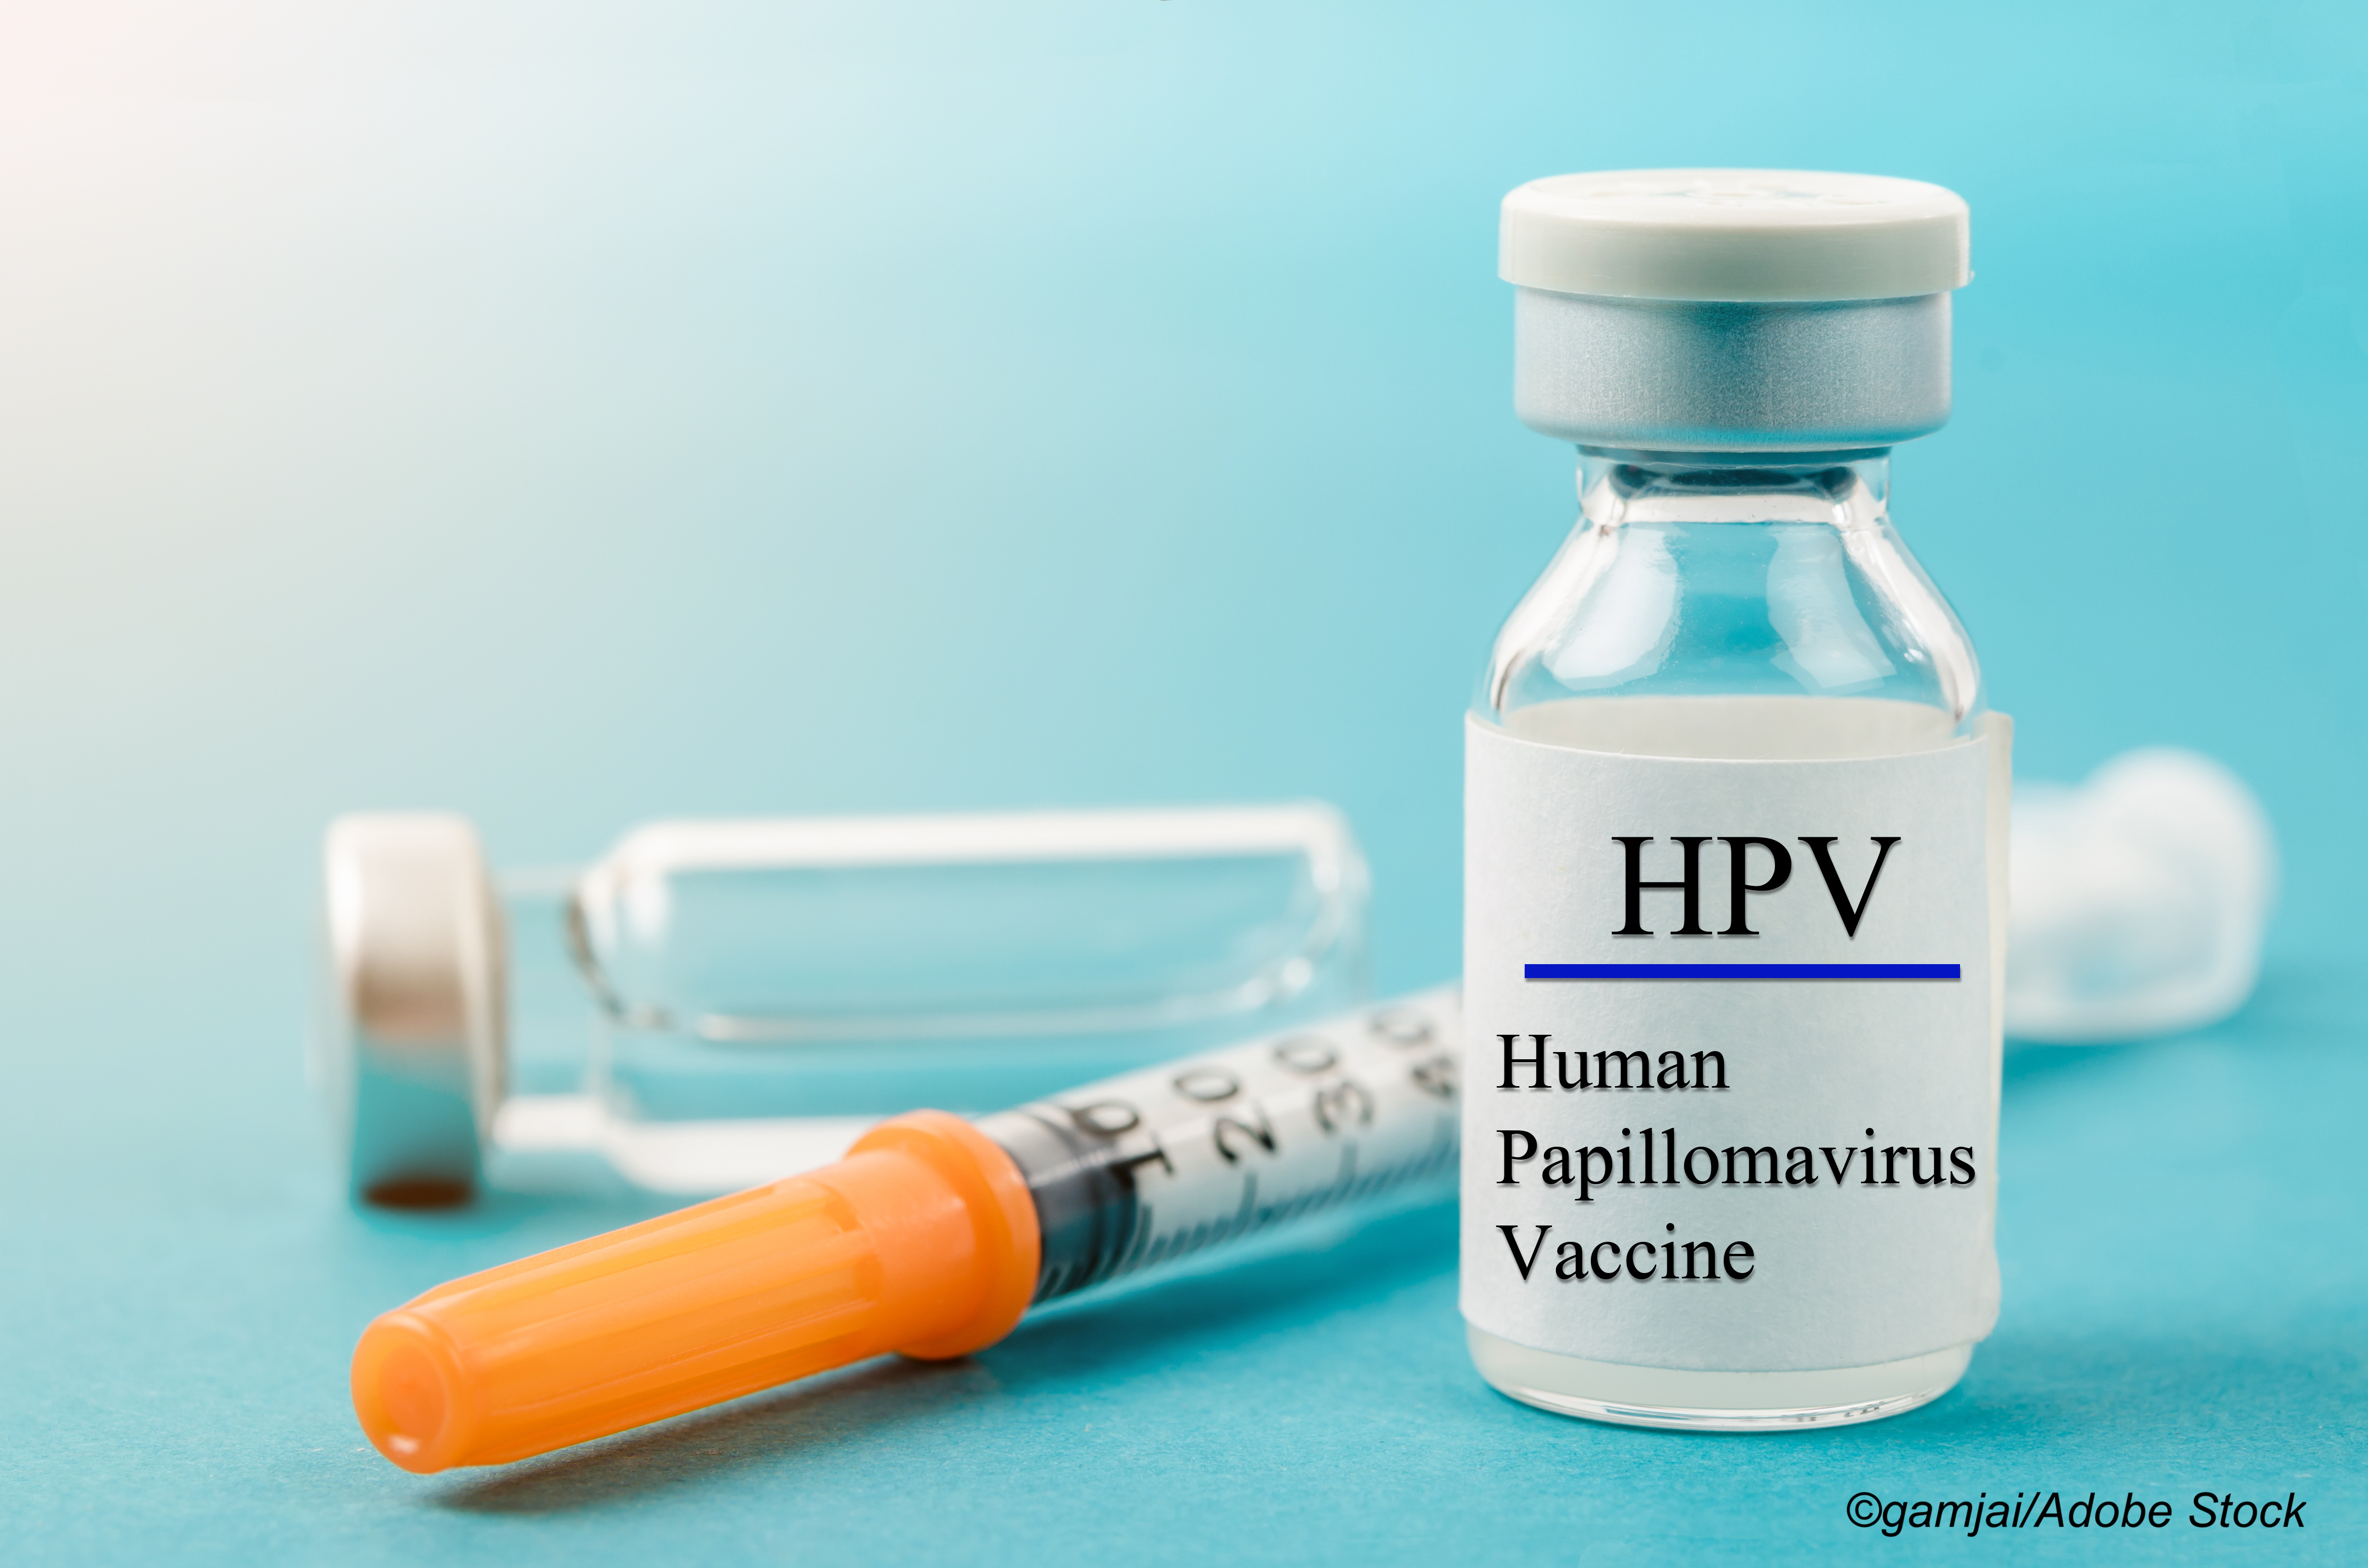 Safety Concerns Drive 80% Increase in HPV Vax Hesitancy